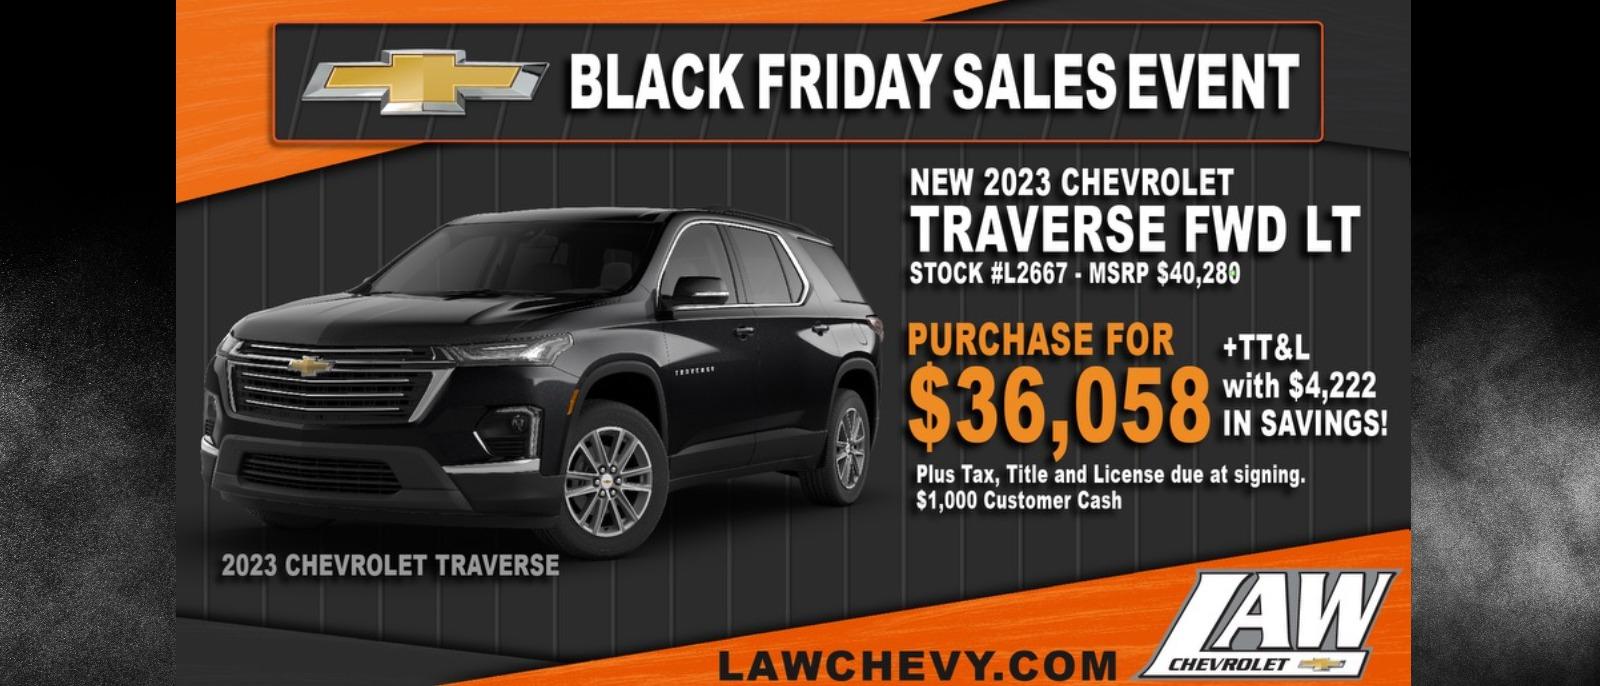 Black friday sales event
2023 Chevrolet Traverse FWD LT
Stock #L2667 - MSRP $40,280
Purchase for $36,058 + TT&L with $4,222 in savings!
Plus Tax, Title and License due at signing.
$1,000 Customer Cash